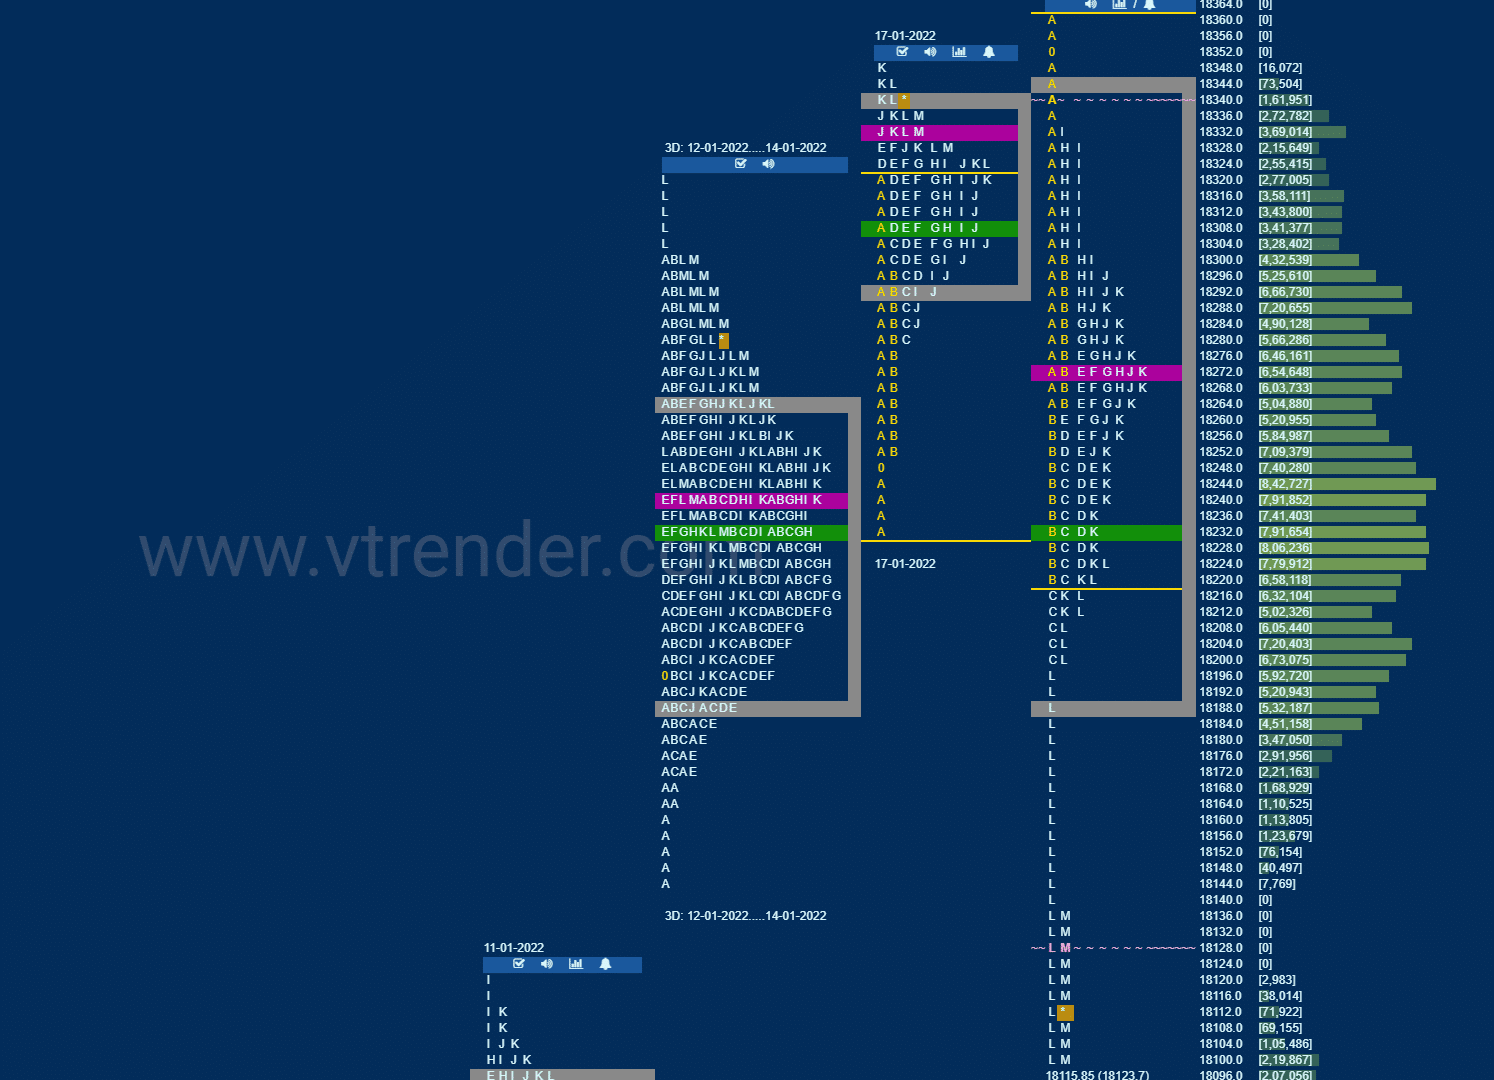 Nf 12 Market Profile Analysis Dated 18Th January 2022 Banknifty Futures, Charts, Day Trading, Intraday Trading, Intraday Trading Strategies, Market Profile, Market Profile Trading Strategies, Nifty Futures, Order Flow Analysis, Support And Resistance, Technical Analysis, Trading Strategies, Volume Profile Trading